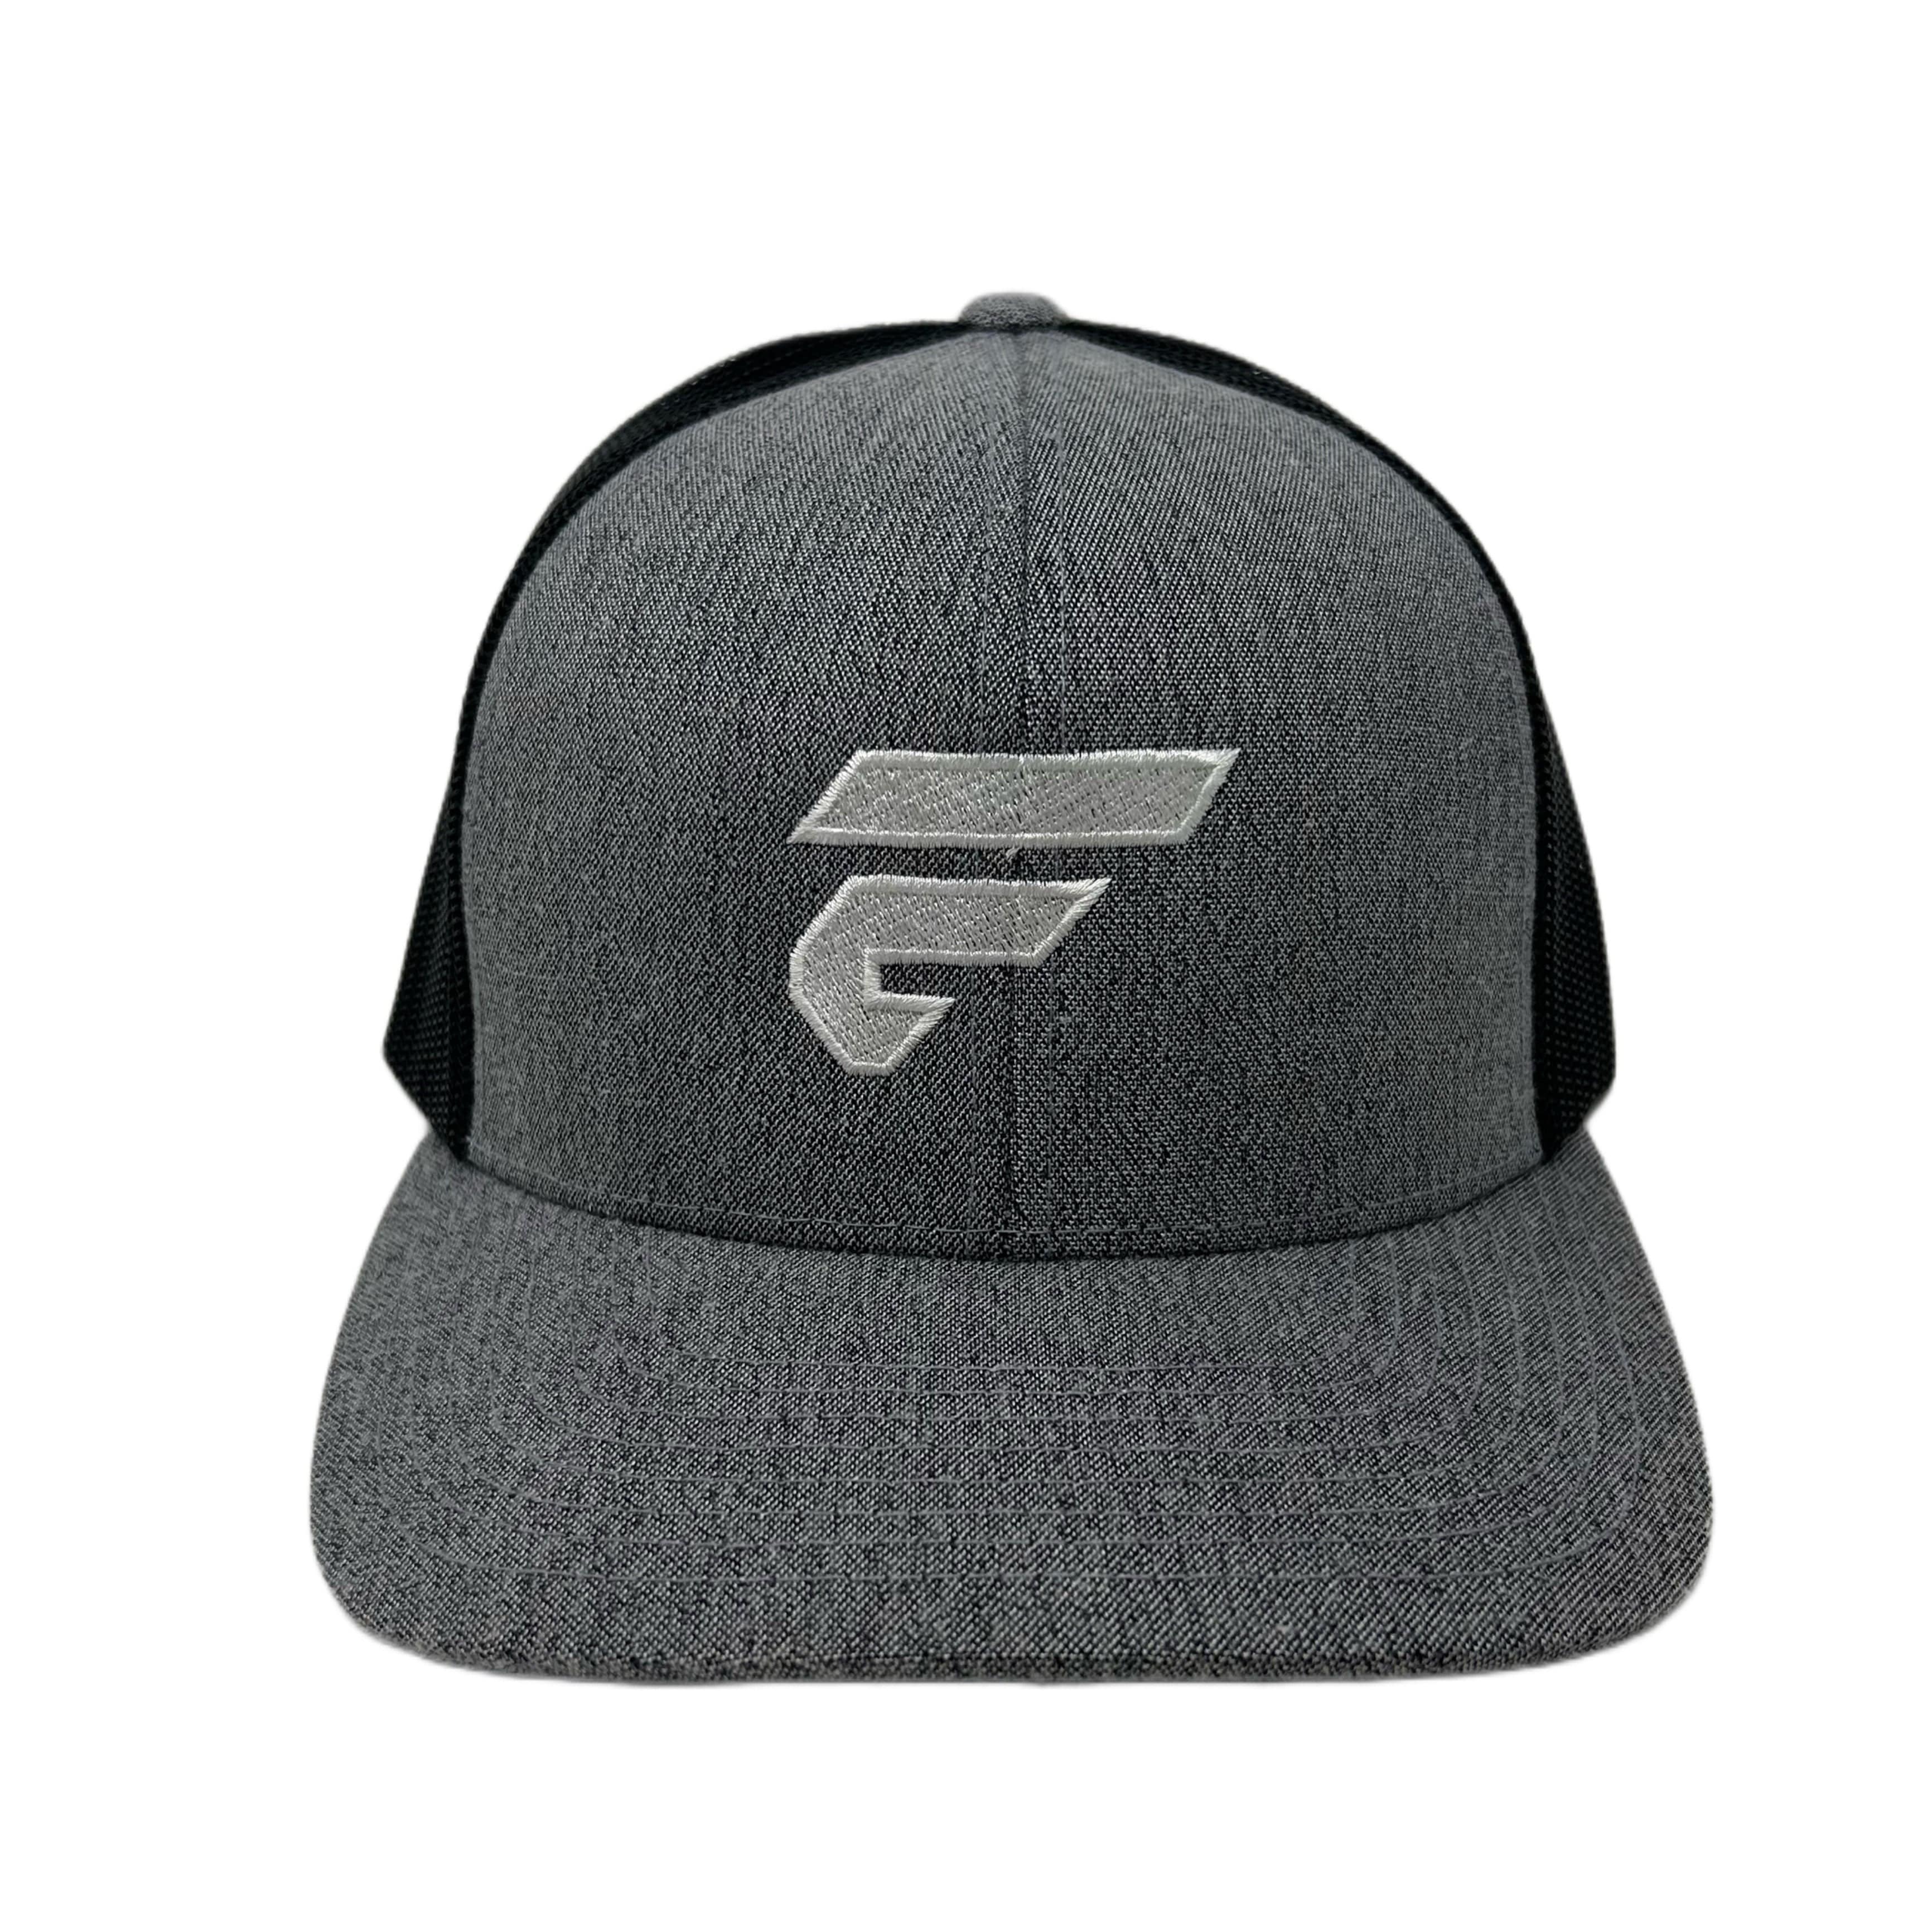 Fire Cornhole Grey Heather/Black Back Fitted Hat with White FC Logo